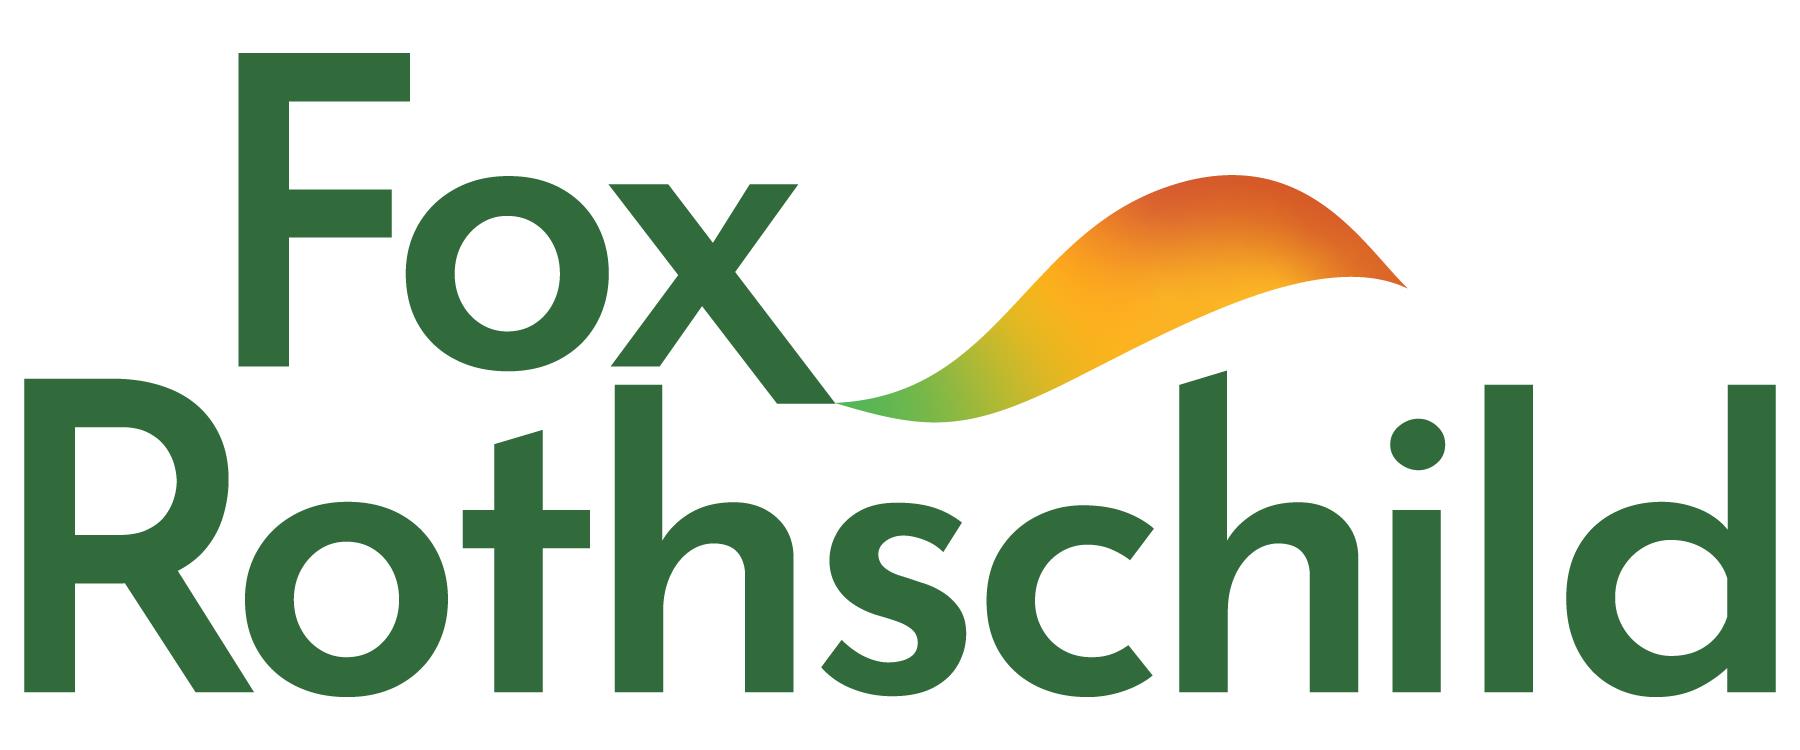 A logo with green and orange text

Description automatically generated